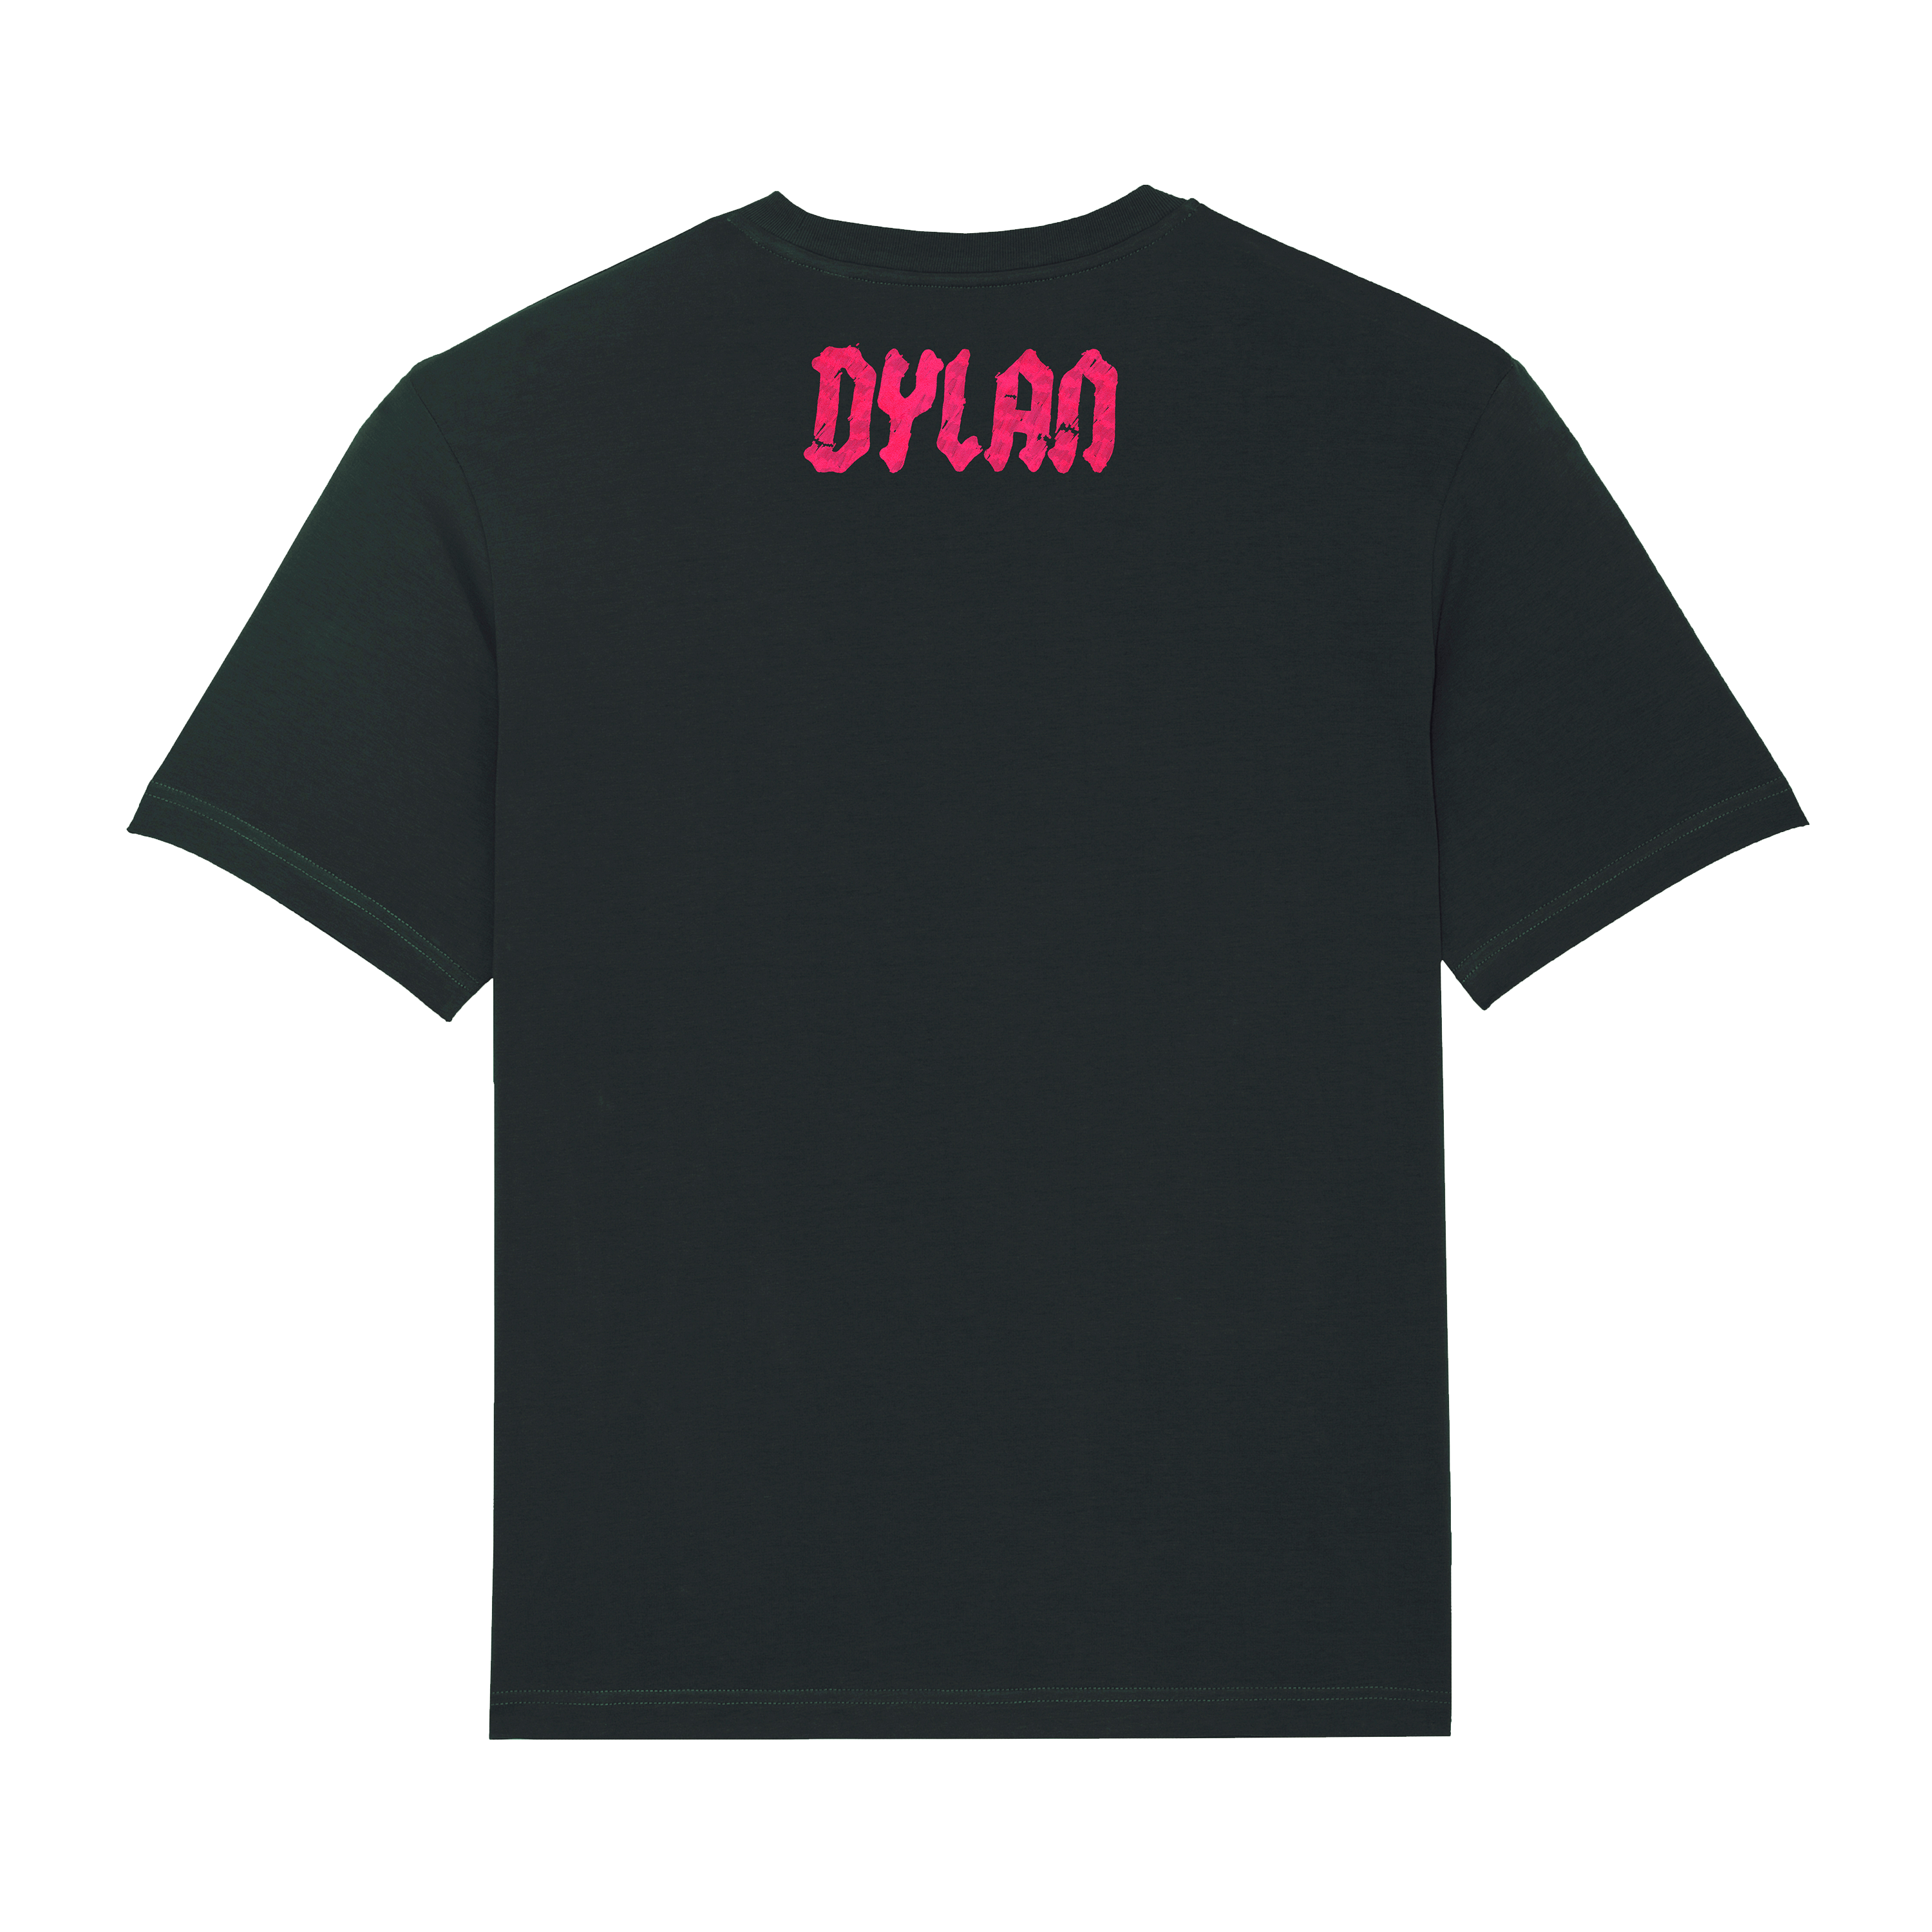 Dylan - Girl Of Your Dreams Tee: Black